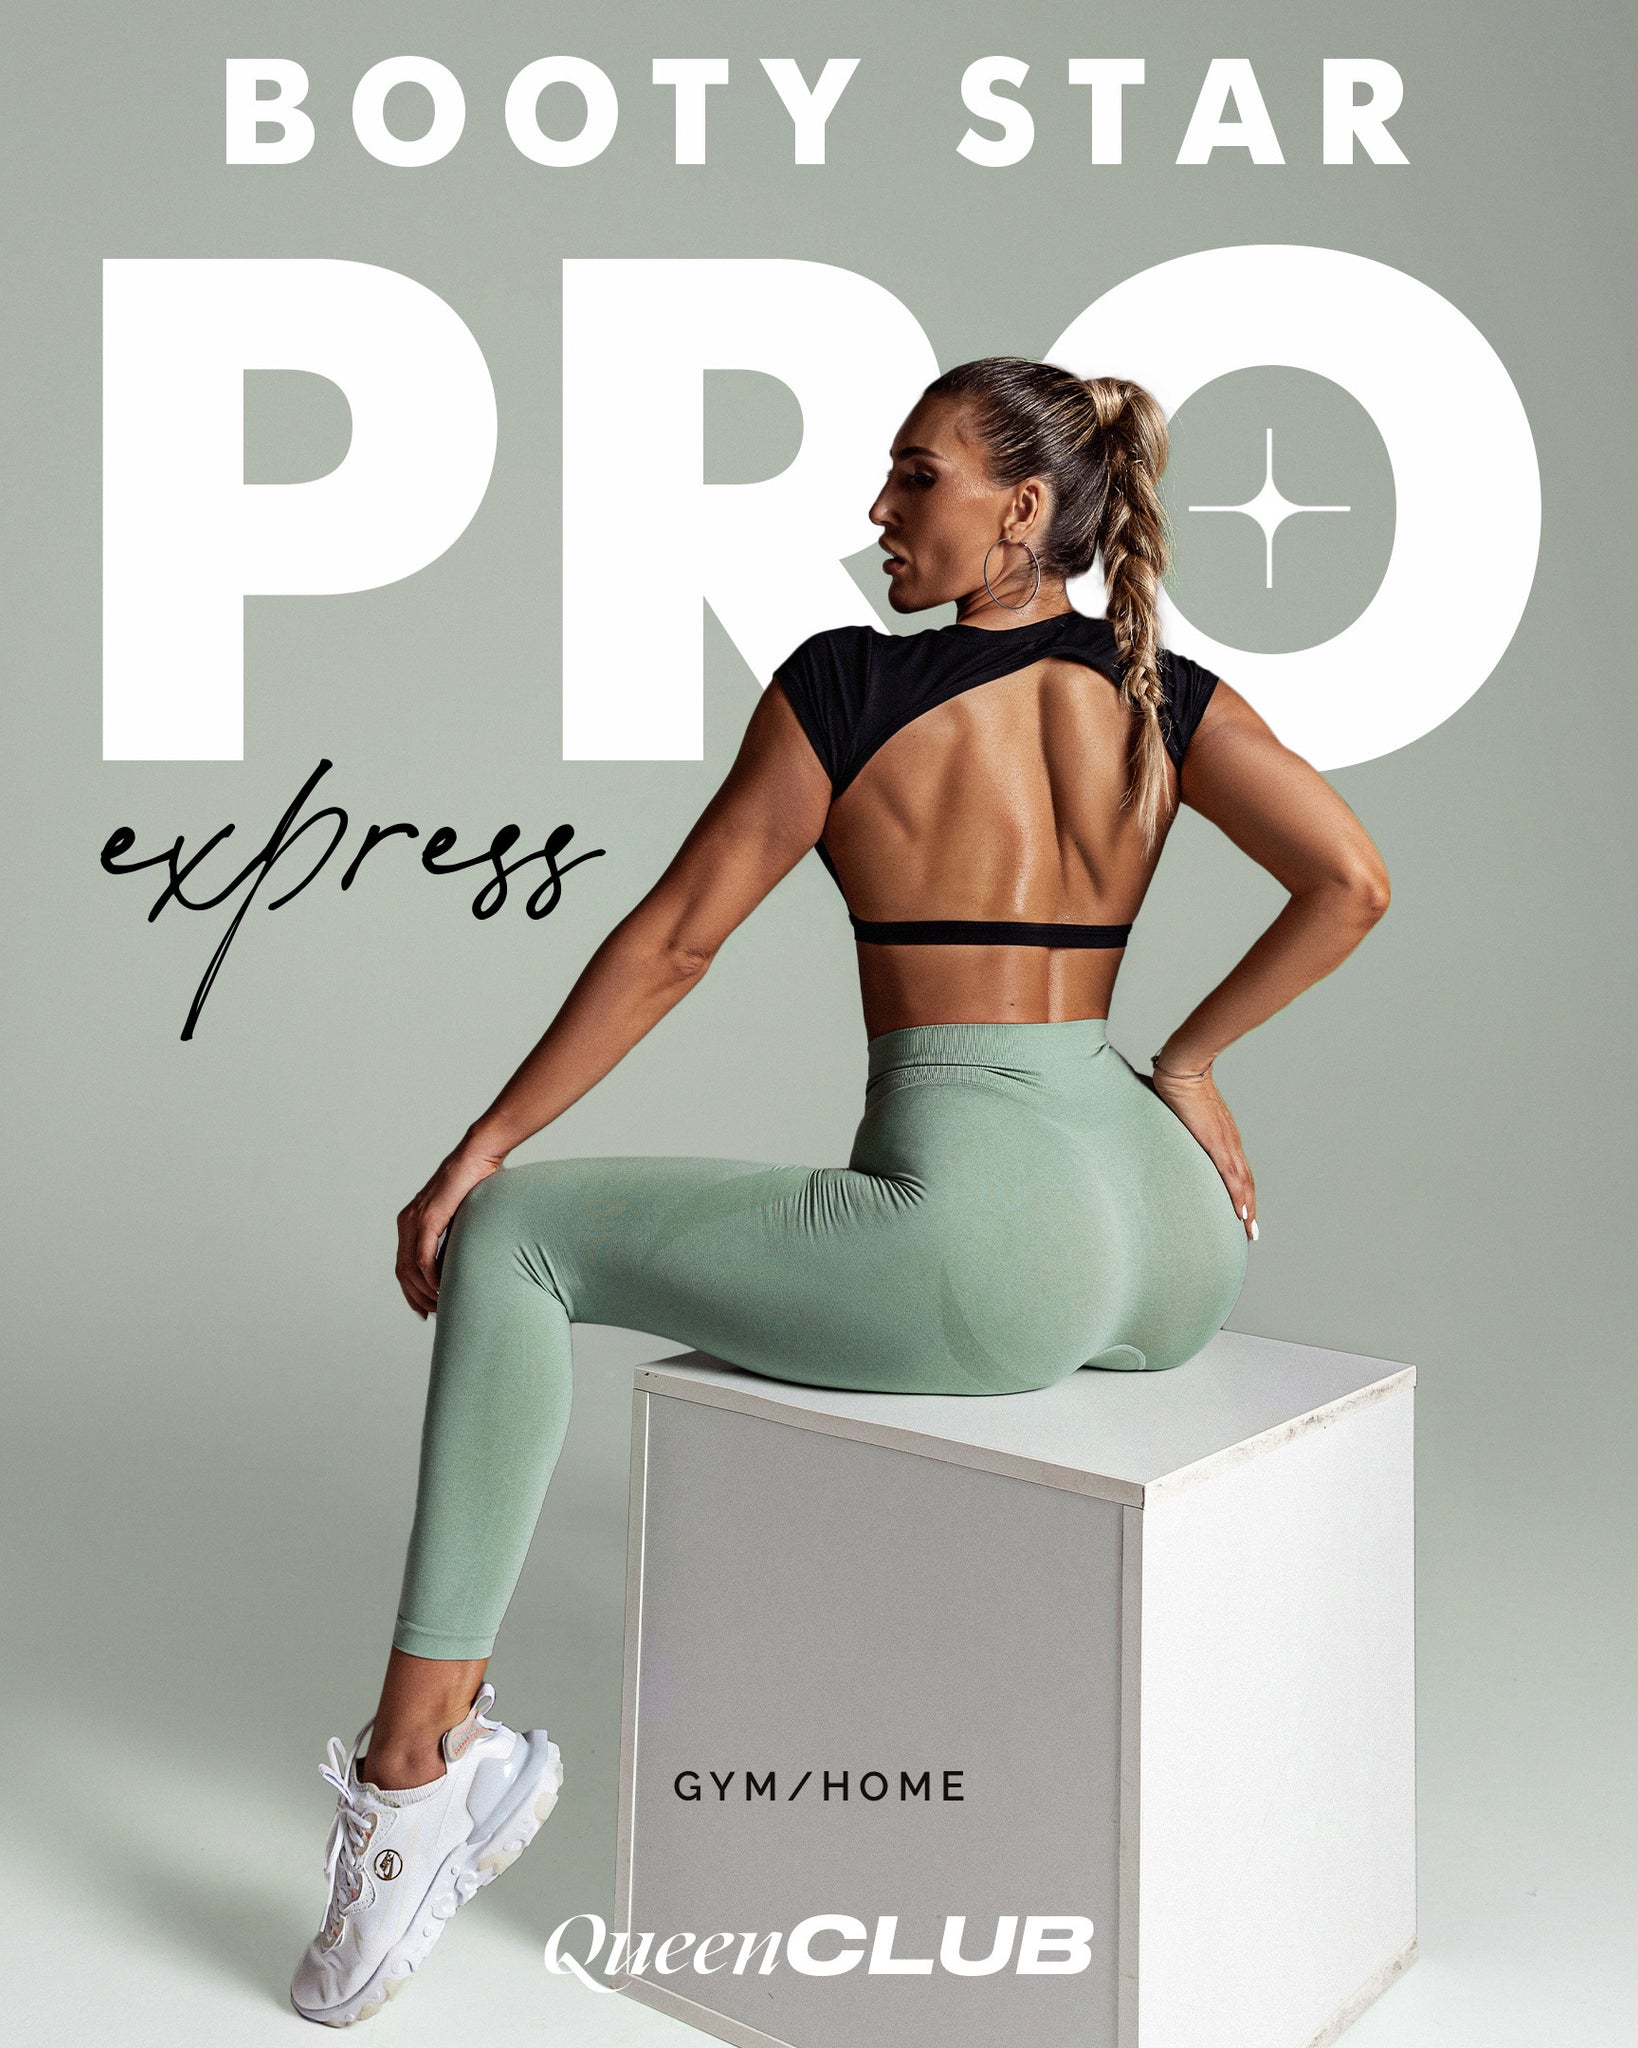 Booty Star Pro Express